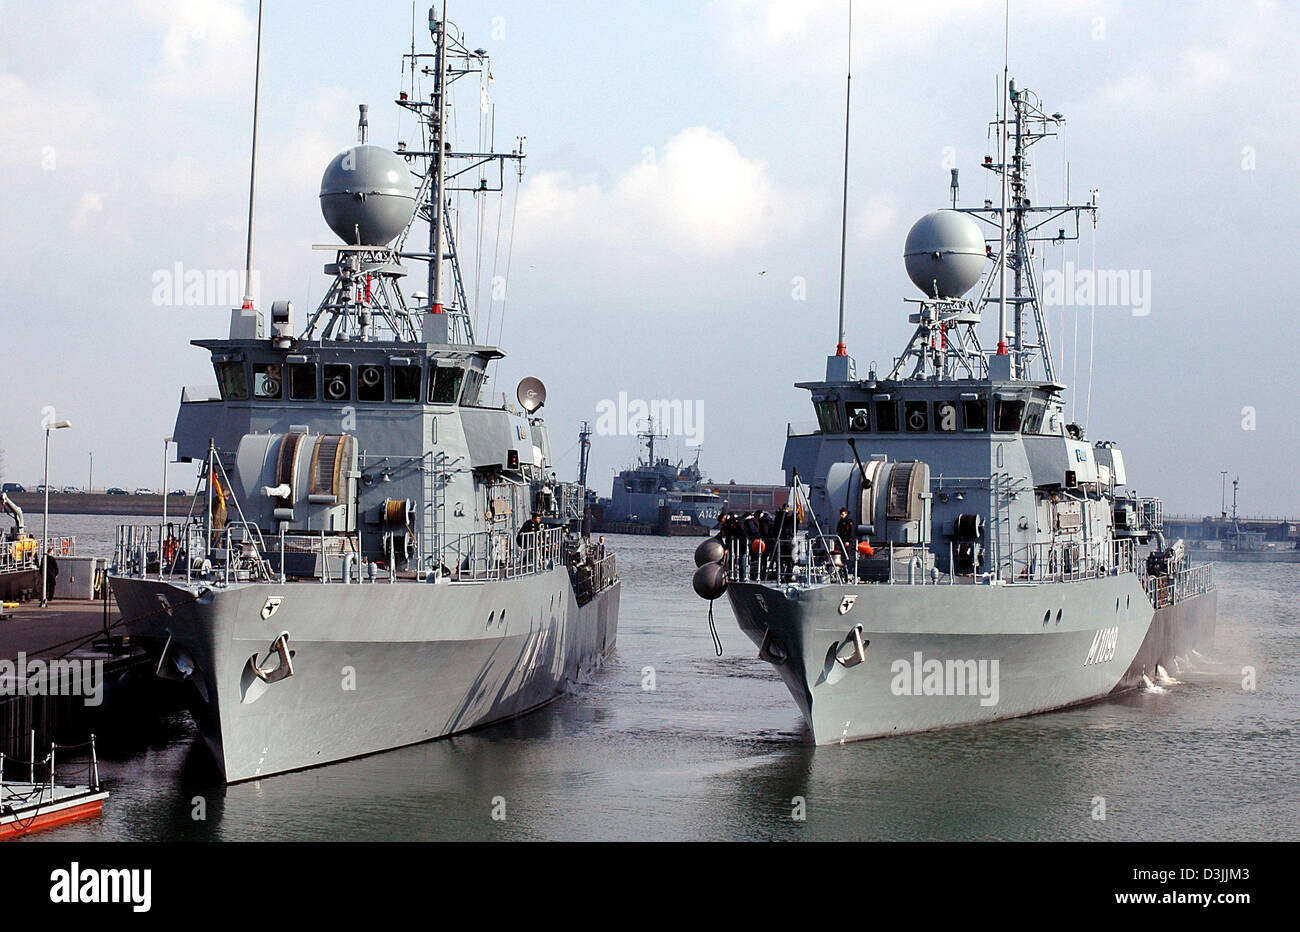 (dpa) - A minesweeper of the German navy (R) leaves while another minesweeper (L) stays at the navy base Olpenitz, Germany, 7 April 2005. Ten ships of the German navy participate in the NATO manoeuvre 'Loyal Mariner'. The manoeuvre takes place with 85 ships and 30 airplanes from 19 states at the Baltic Sea between 11 and 29 April. Stock Photo